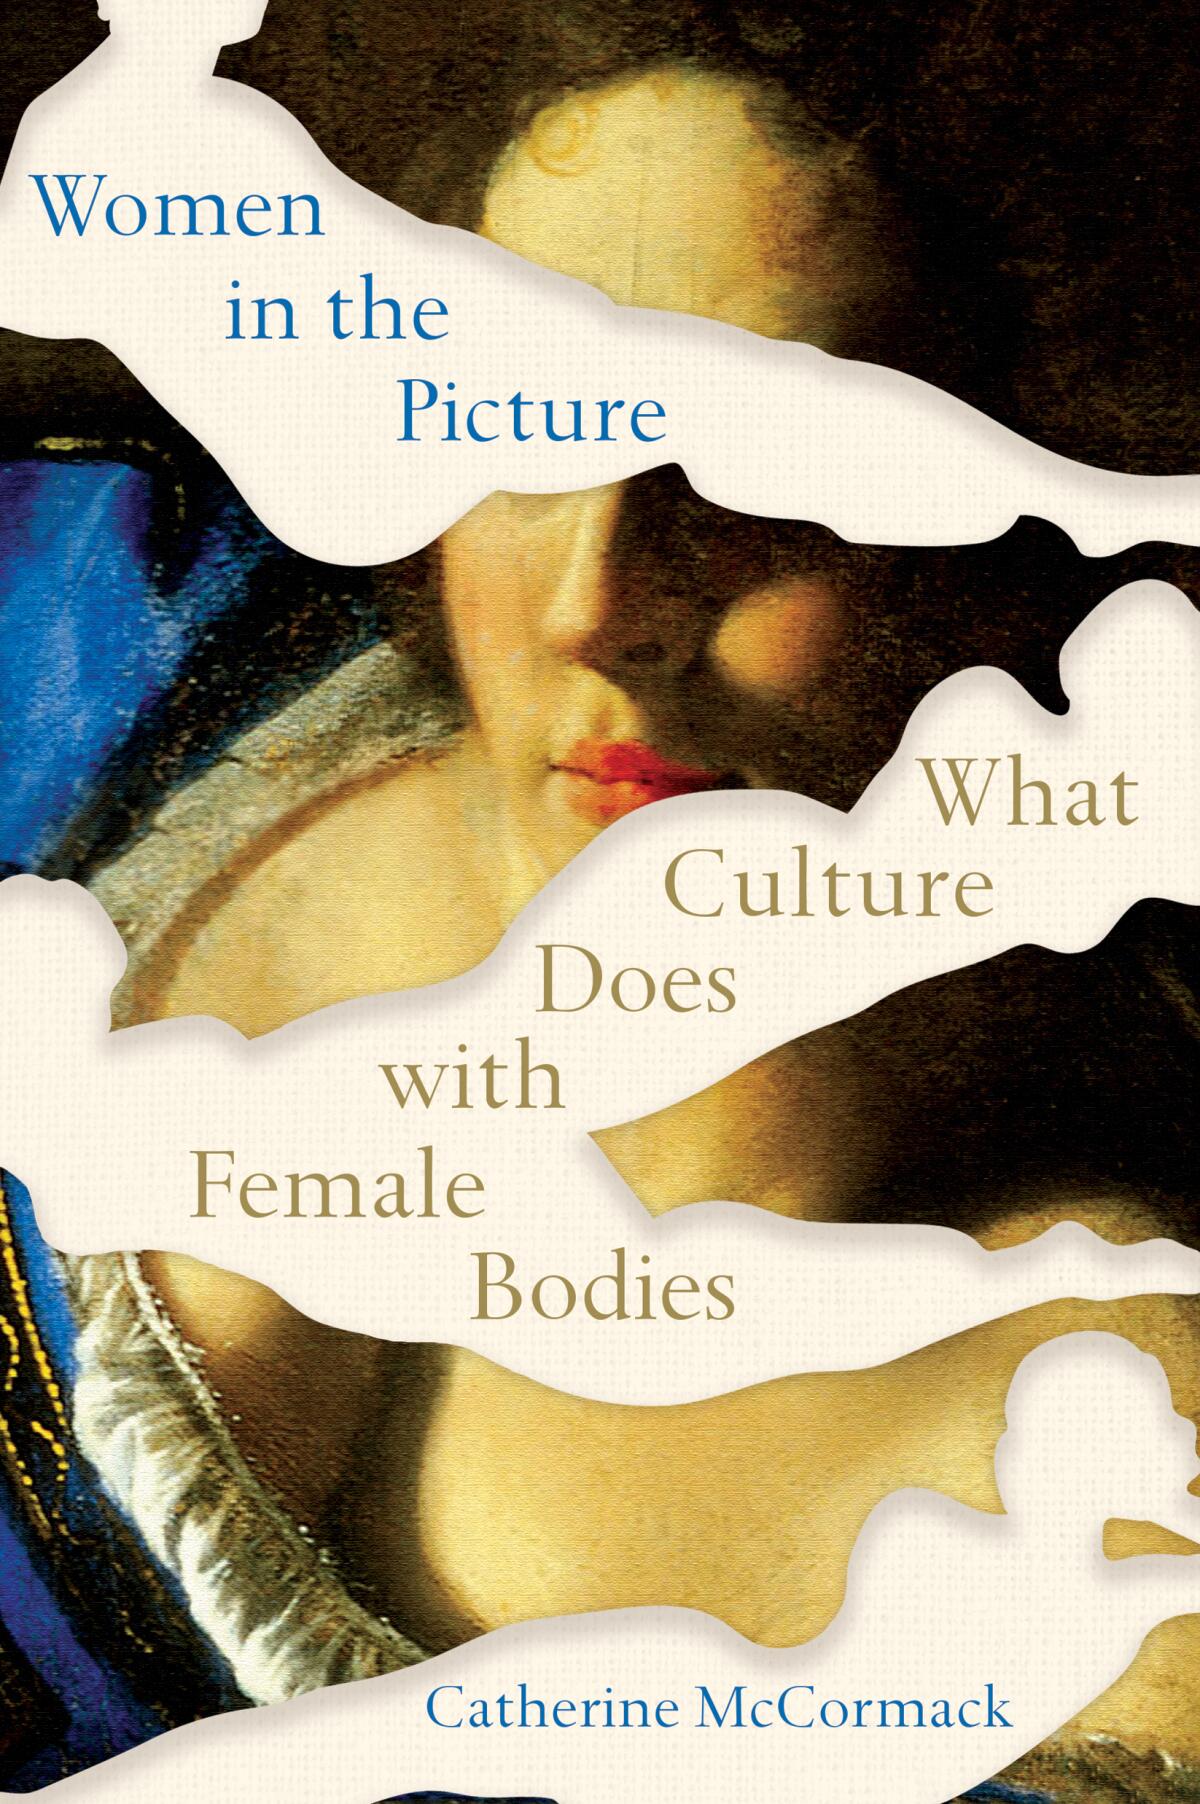 The cover of the book "Women in the Picture: What Culture Does With Female Bodies," by Catherine McCormack.